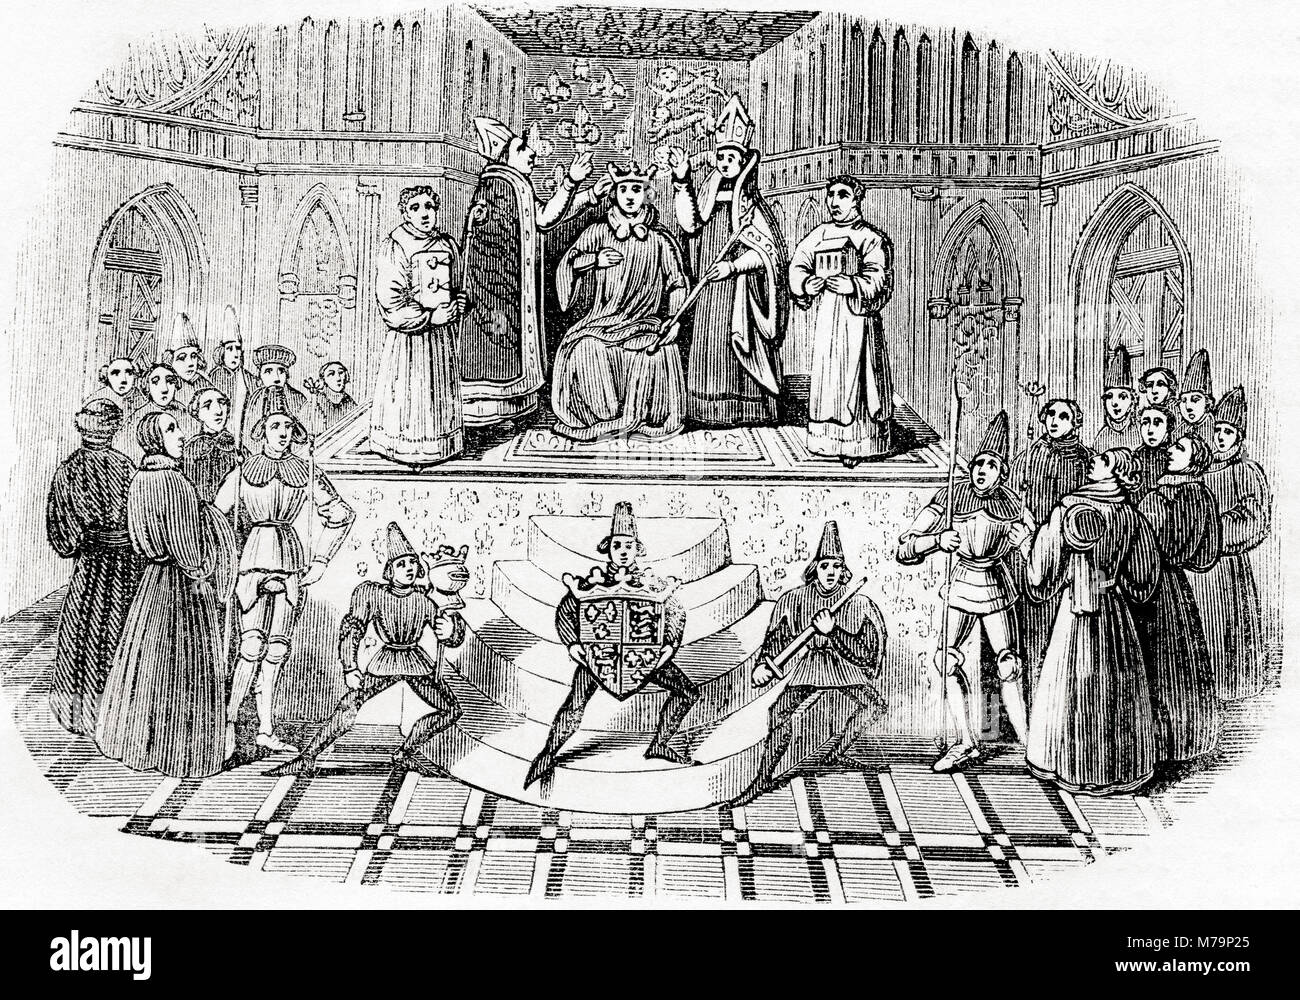 Coronation of Henry IV, 13 October 1399.  Henry IV, 1367 - 1413, aka Henry of Bolingbroke. King of England and Lord of Ireland.  From Old England: A Pictorial Museum, published 1847. Stock Photo